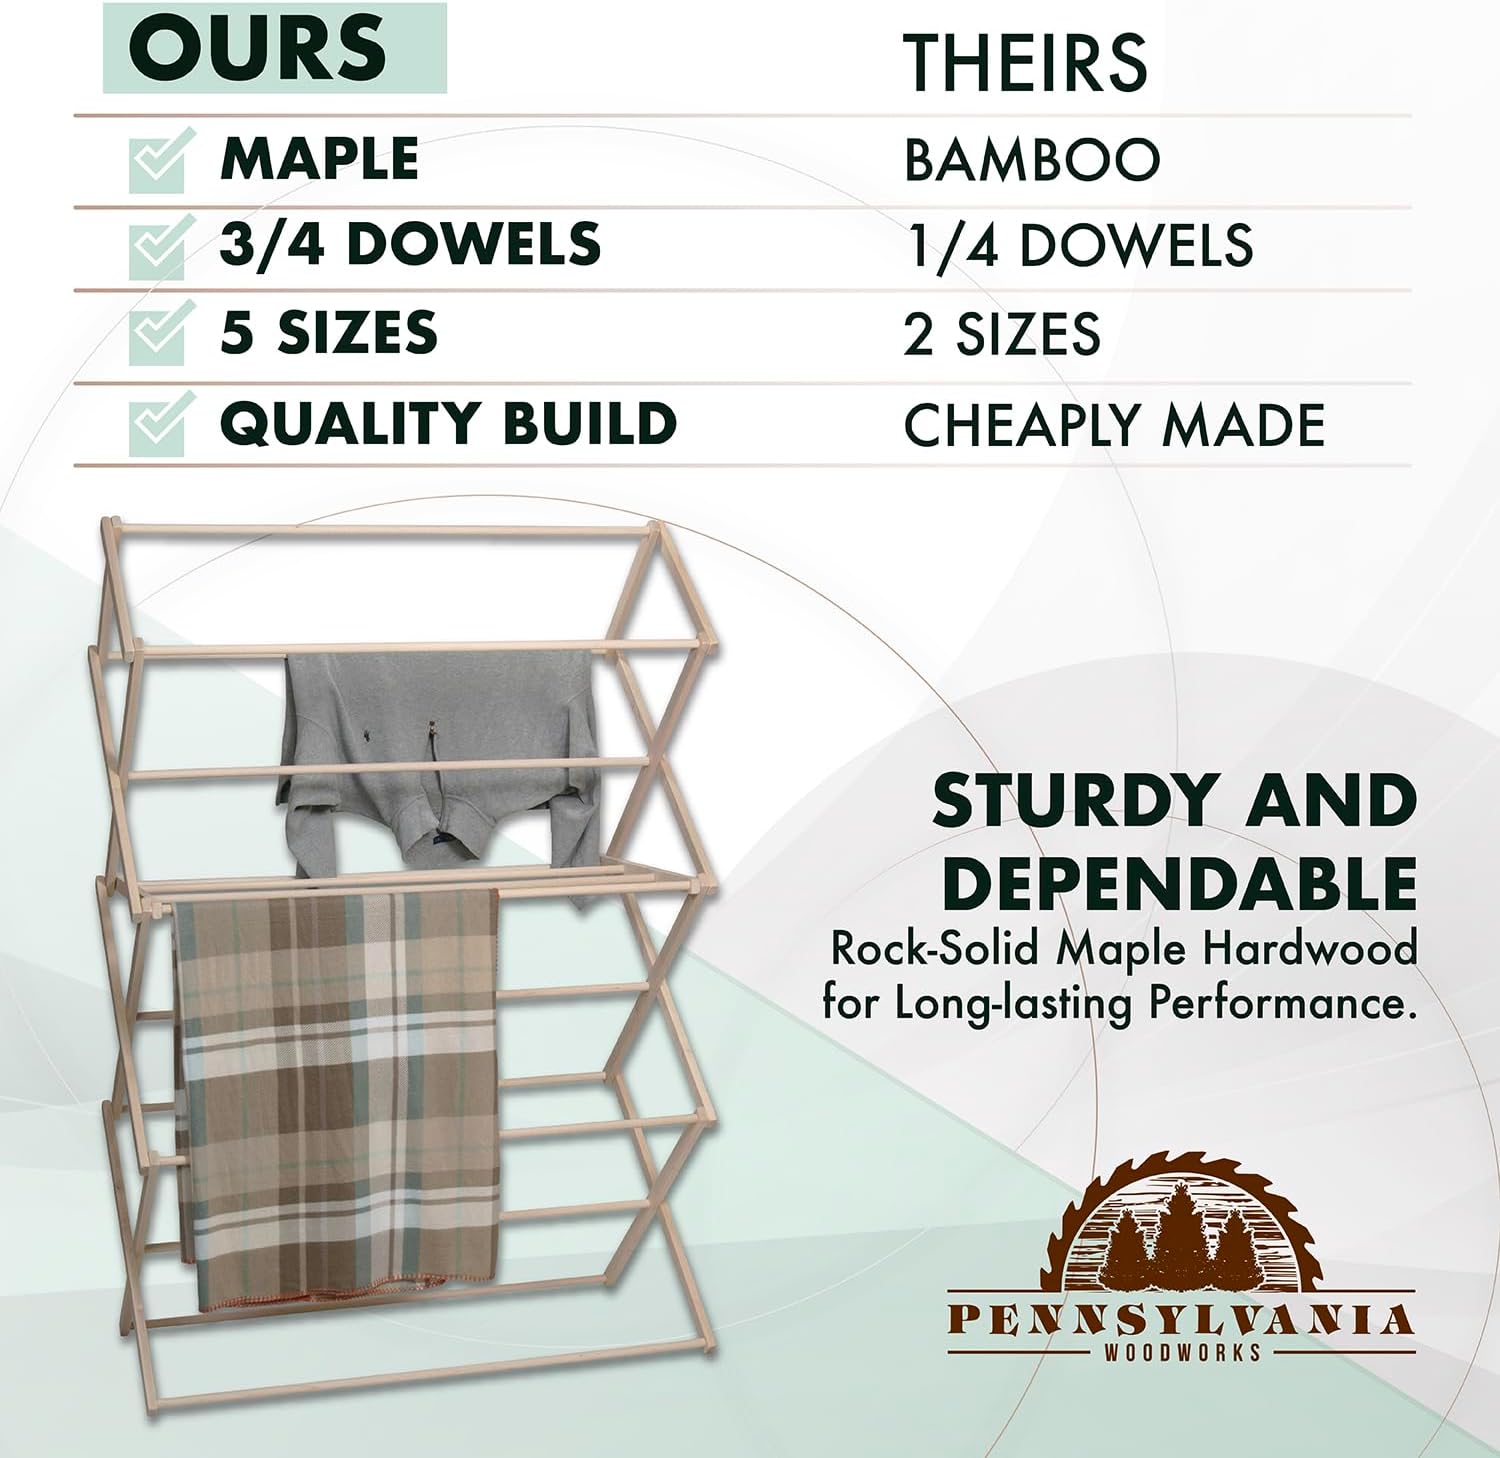 https://bigbigmart.com/wp-content/uploads/2023/12/Pennsylvania-Woodworks-Clothes-Drying-Rack-Solid-Maple-Hard-Wood-Laundry-Rack-for-Sweaters-Blouses-Lingerie-More-Durable-Folding-Drying-Rack-Made-in-USA-No-Assembly-Needed-Large1-1.jpg